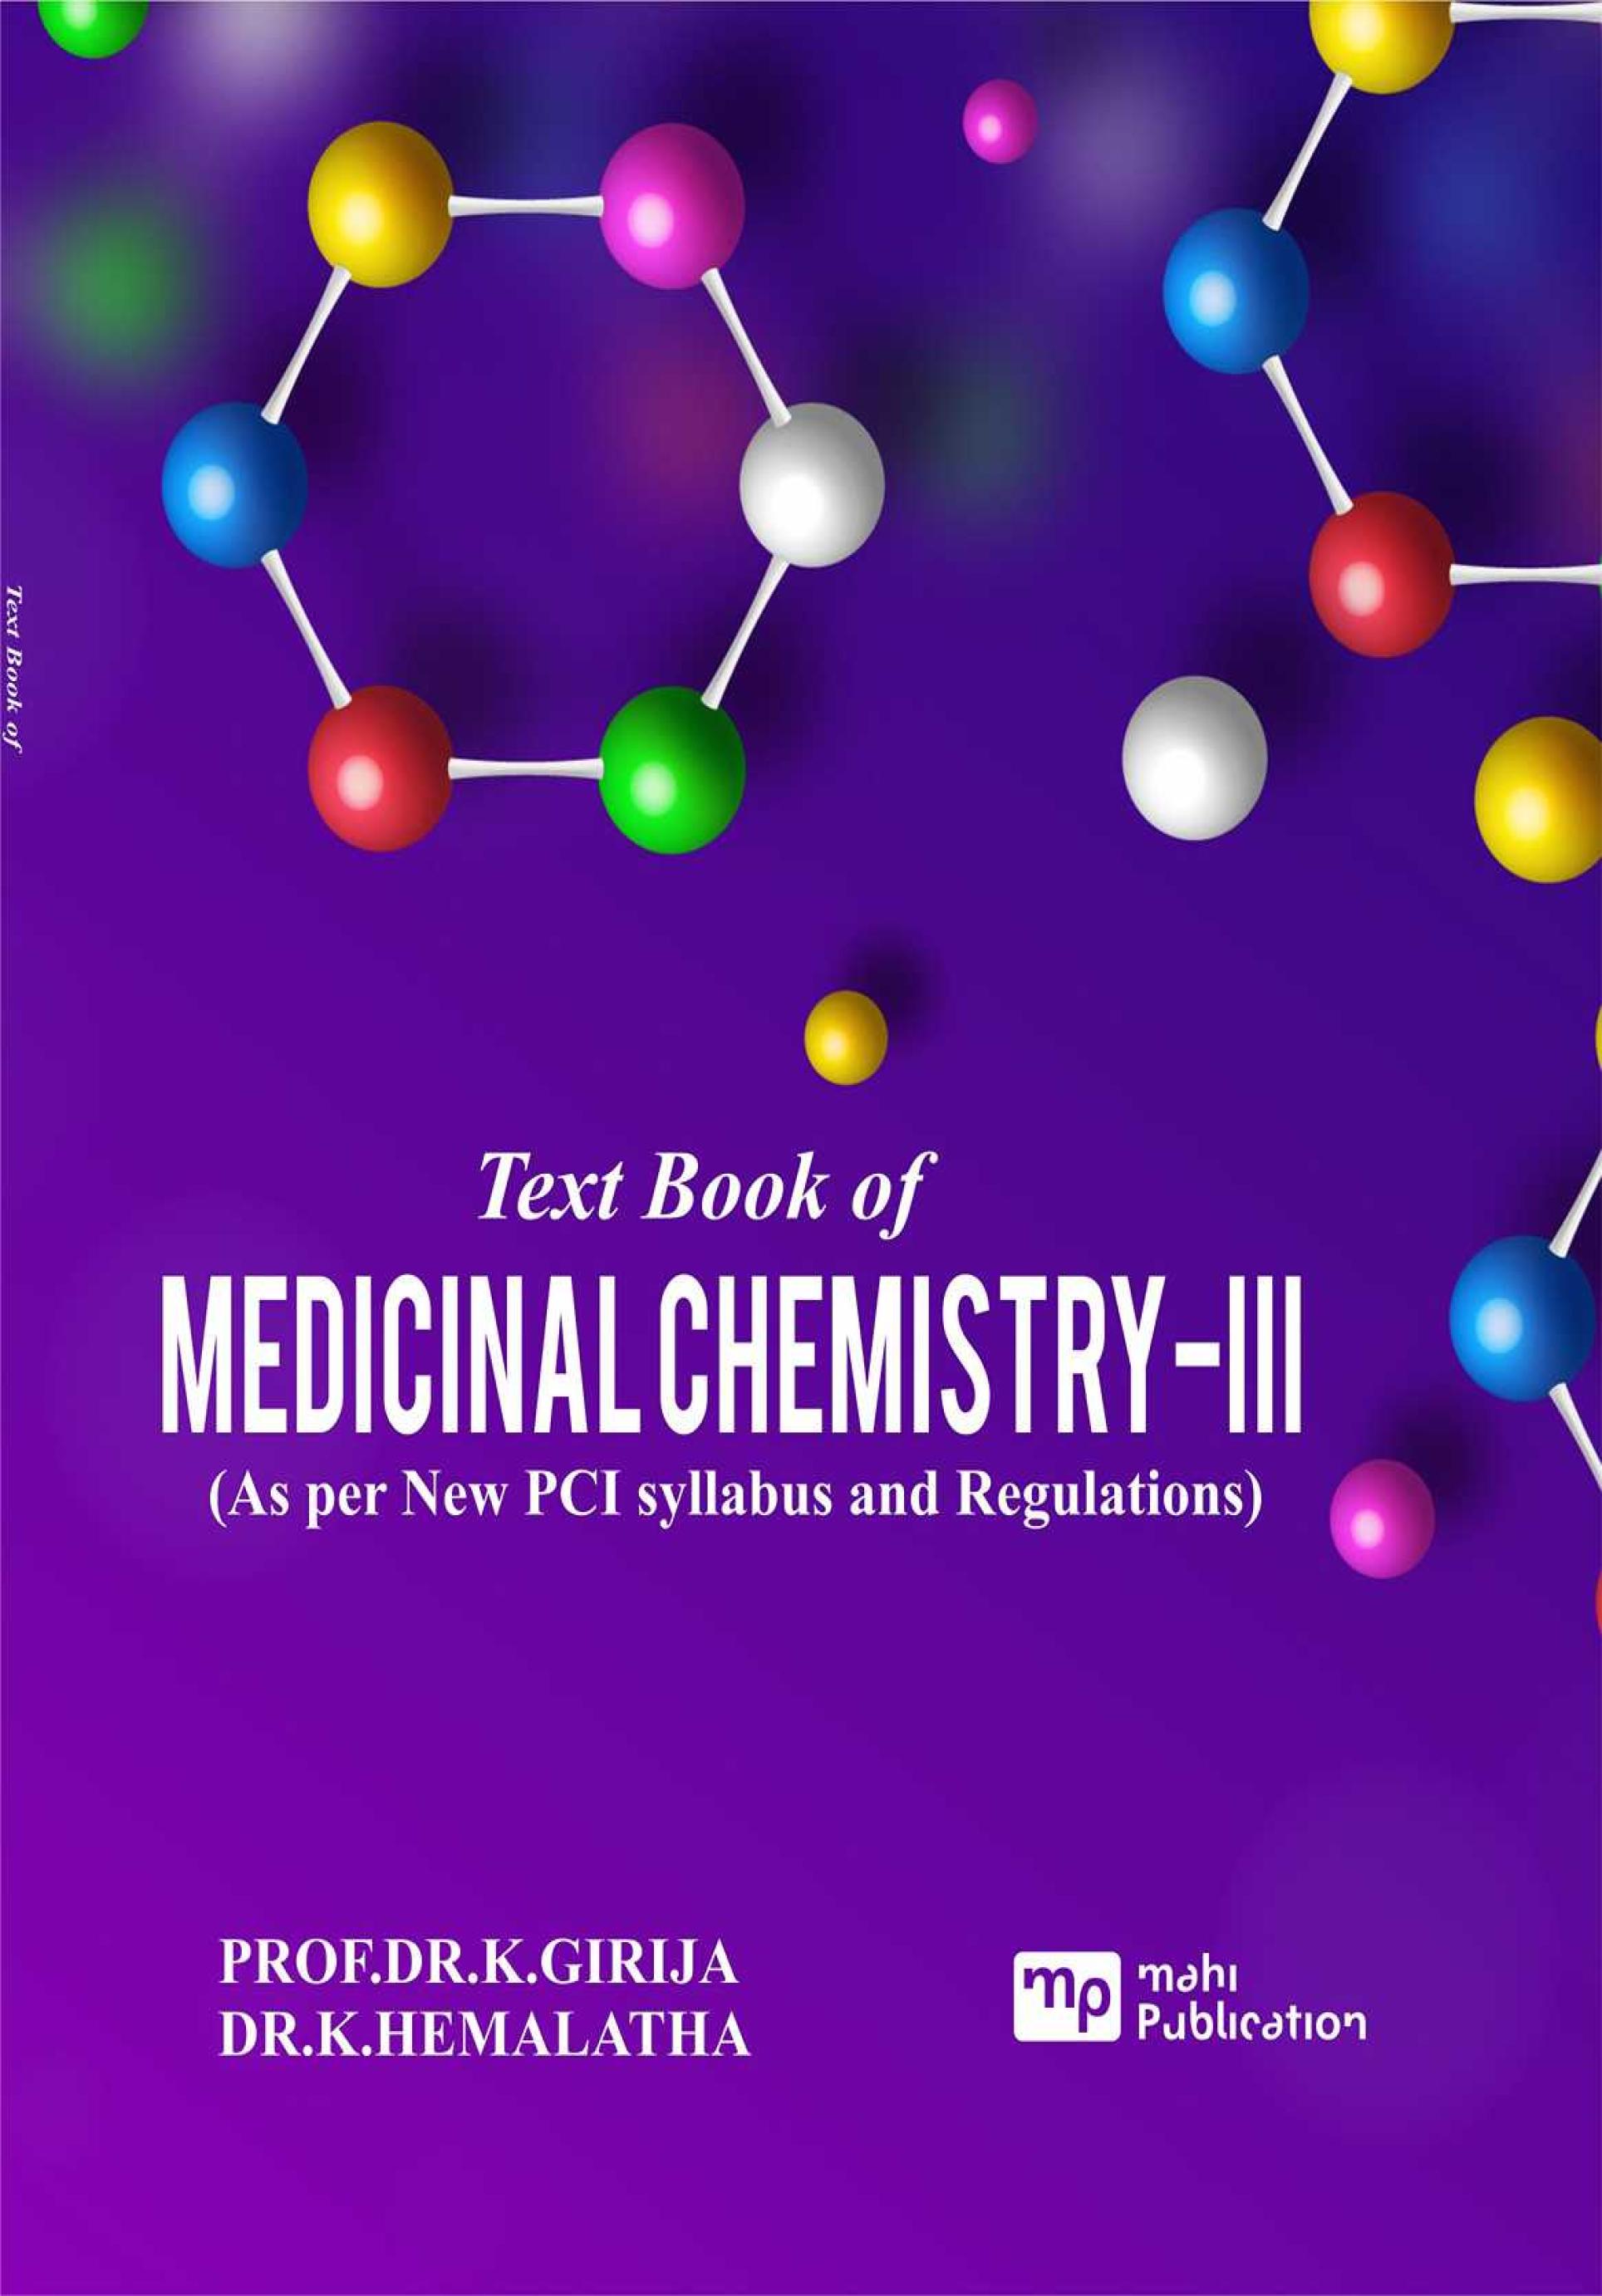 Text Book of MEDICINAL Chemistry-III (As per New PCI syllabus and Regulations)